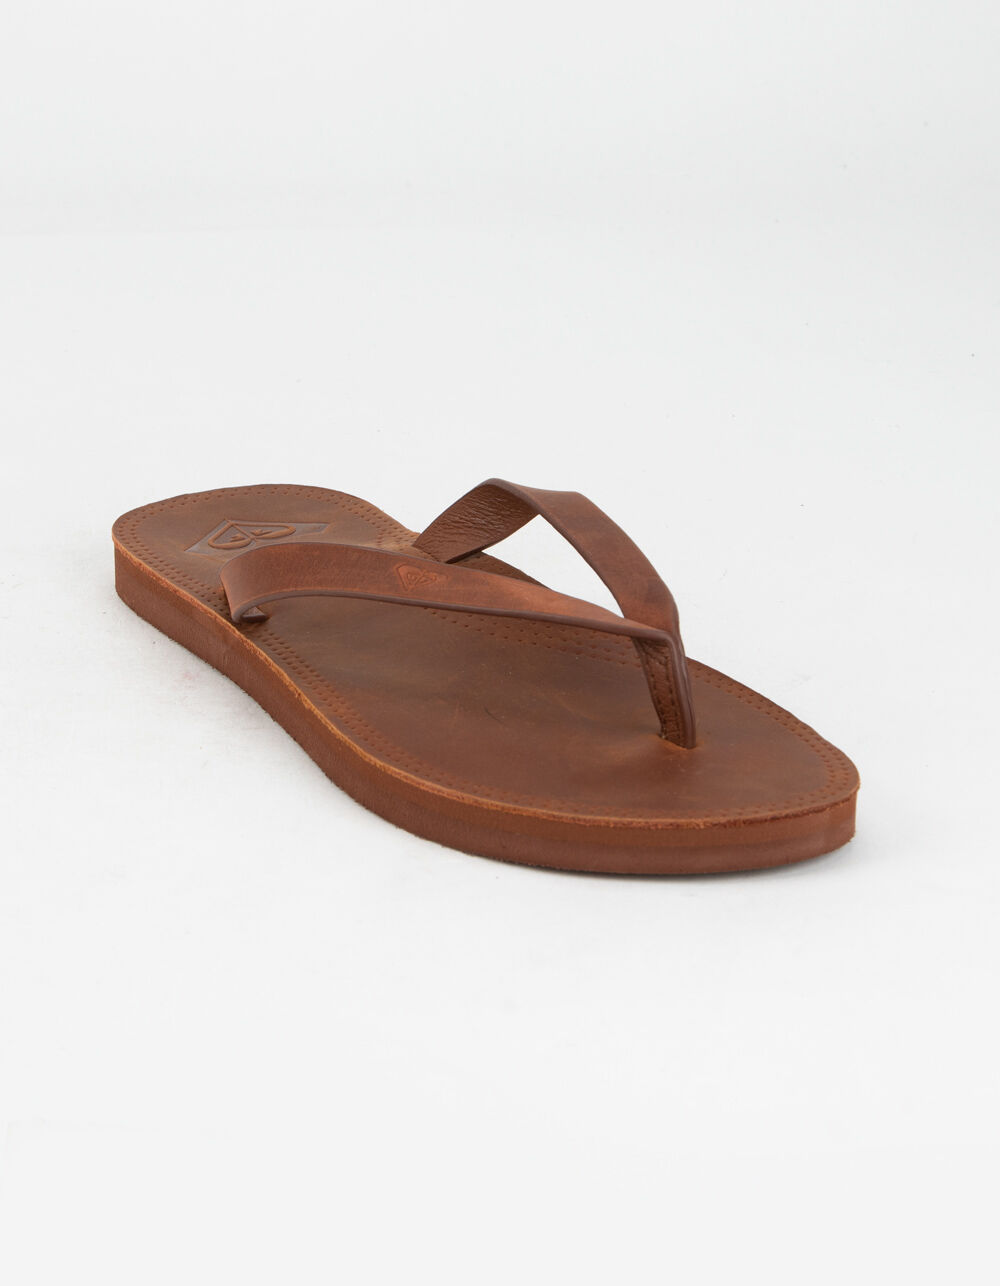 ROXY Brinn Womens Leather Sandals image number 0